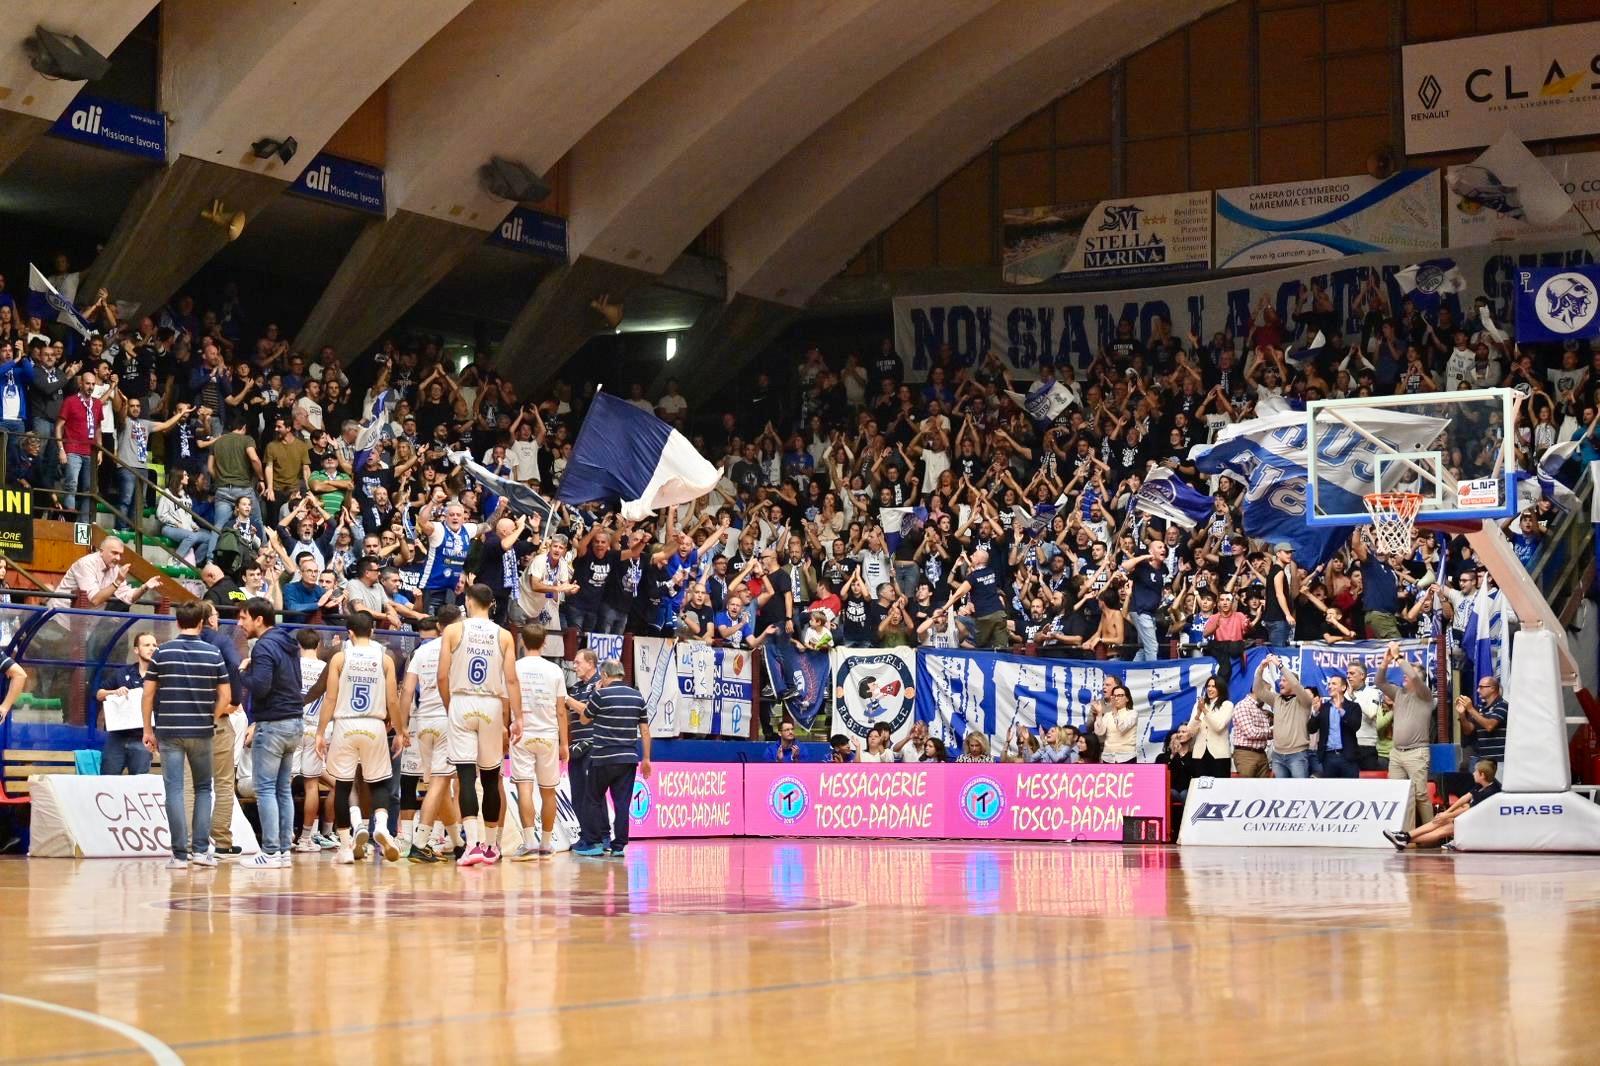 Pielle unstoppable, Desio defeated 86-73.